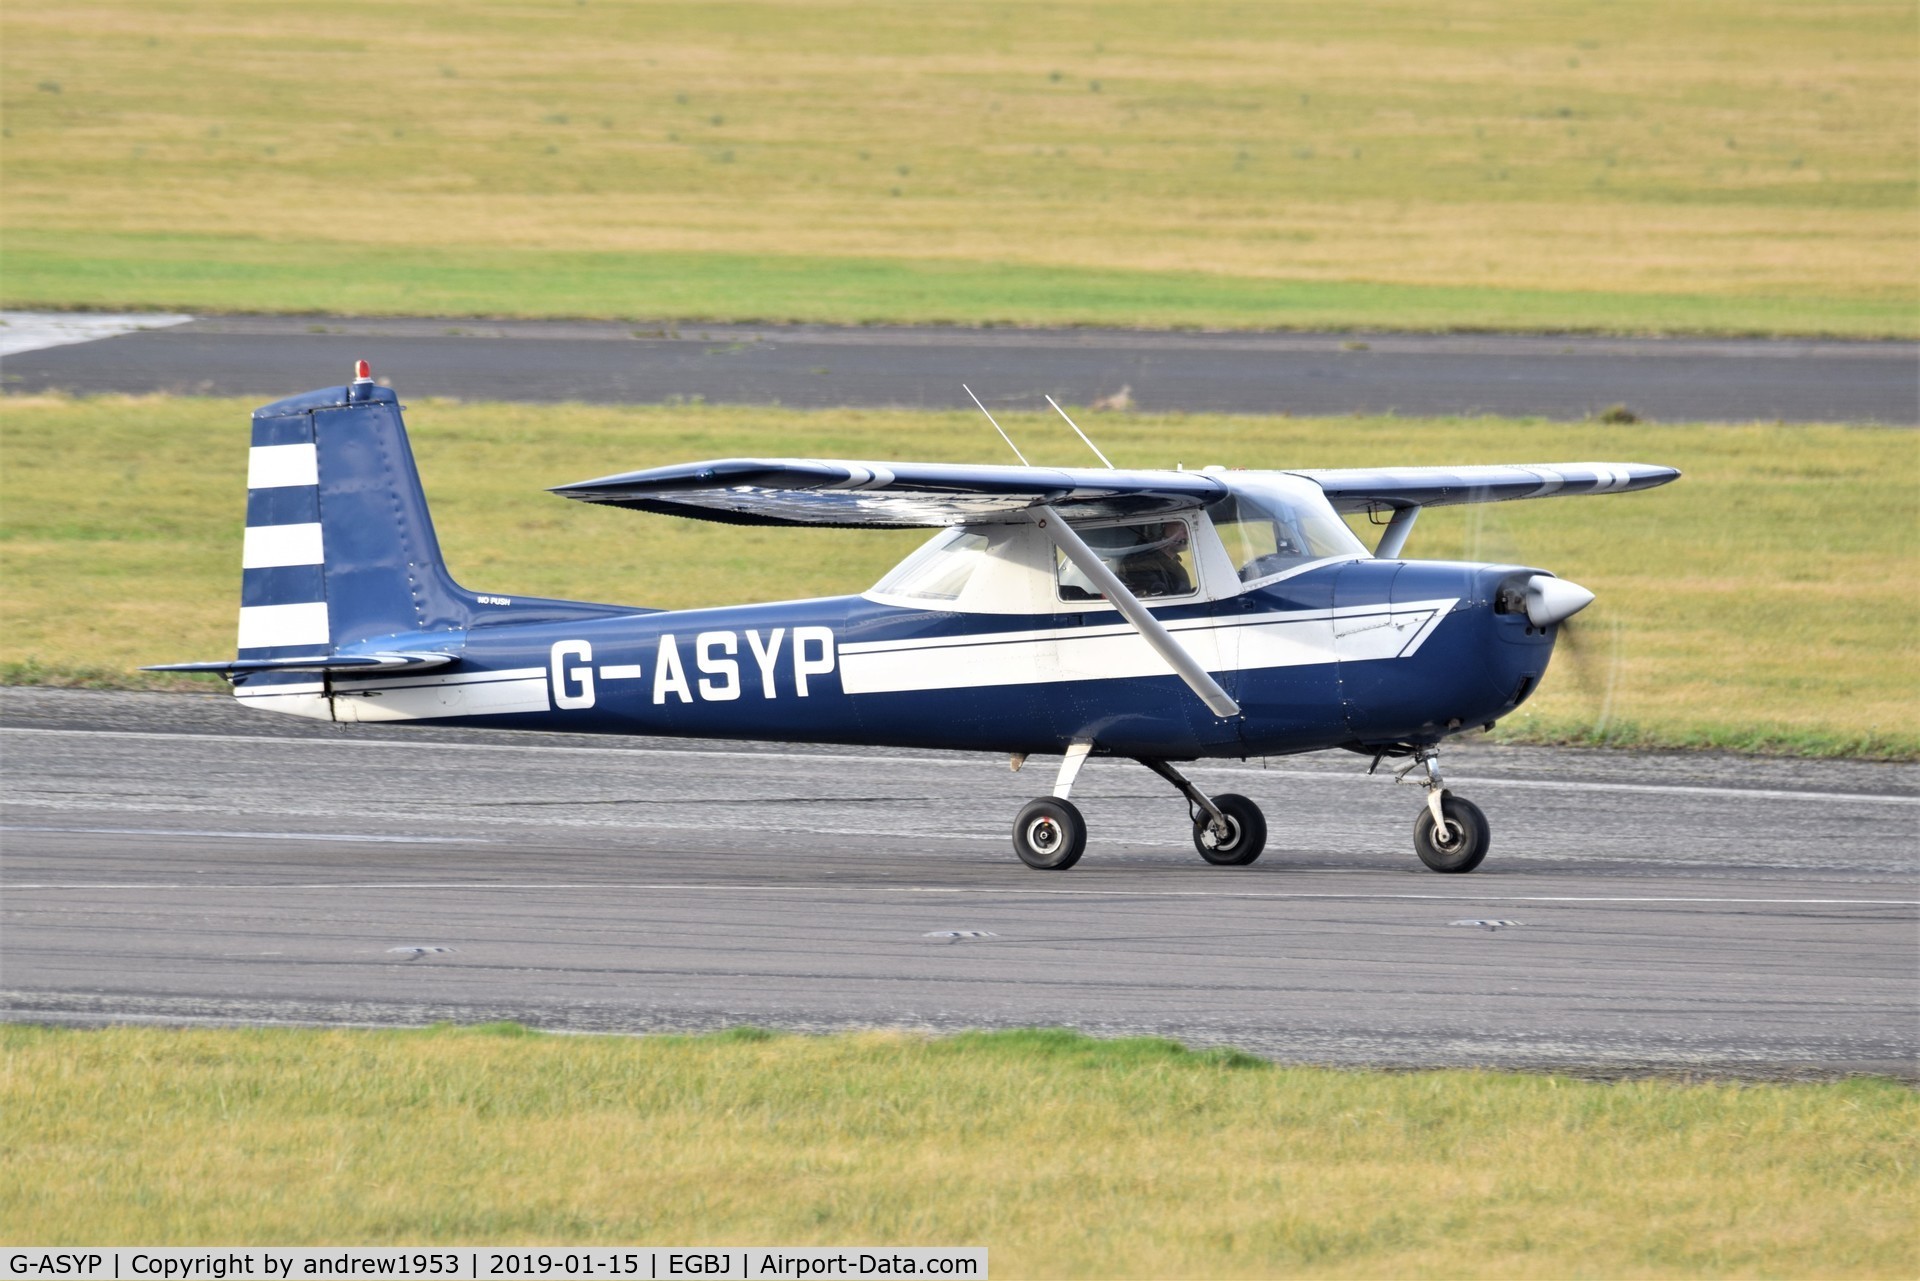 G-ASYP, 1964 Cessna 150E C/N 150-60794, G-ASYP at Gloucestershire Airport.